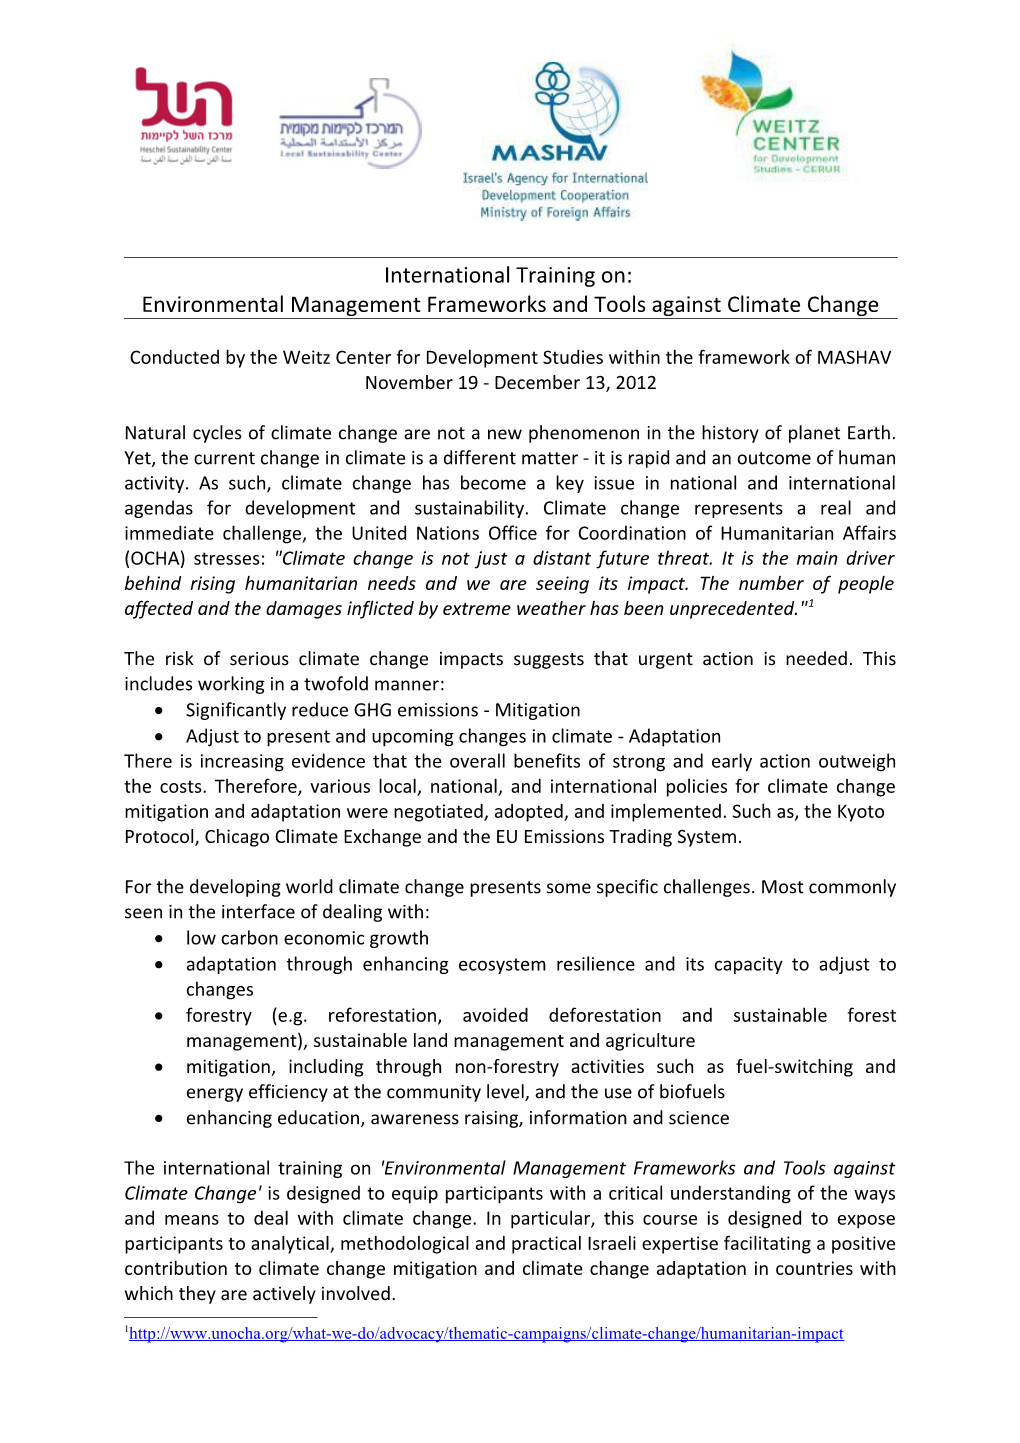 Environmental Management Frameworks and Tools Against Climate Change